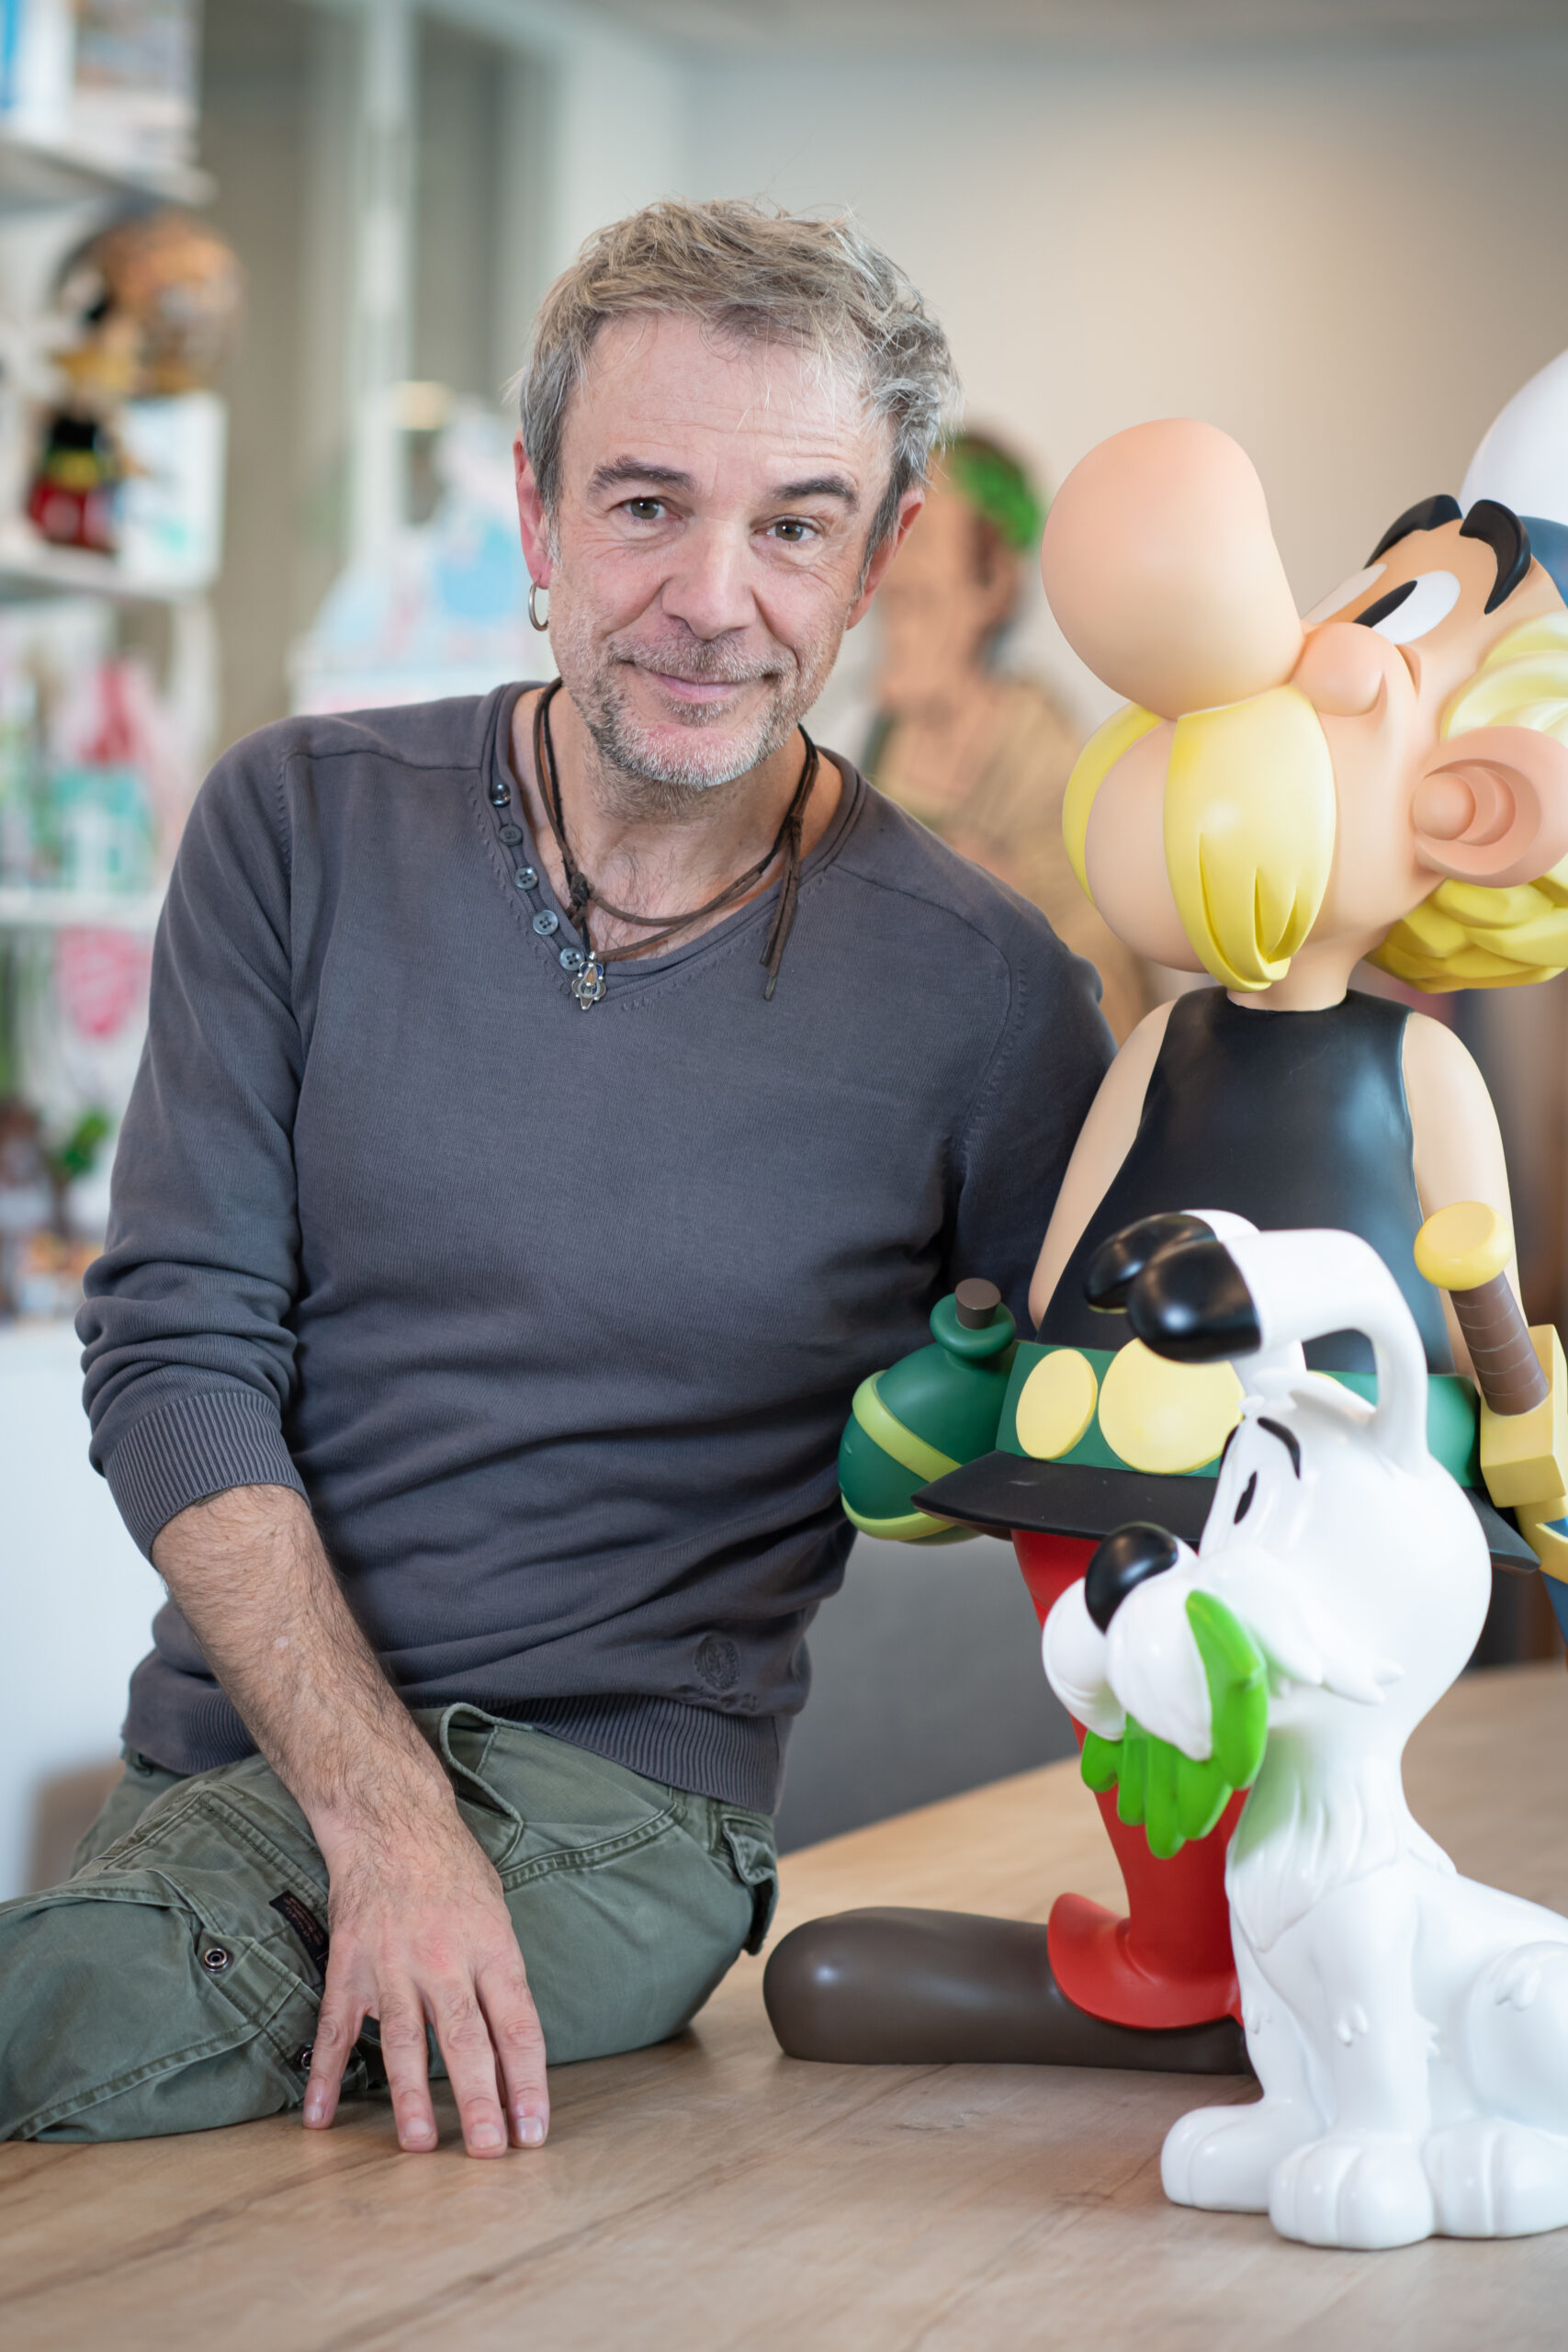 The new Asterix album will publish on 21st October 2021! - Asterix